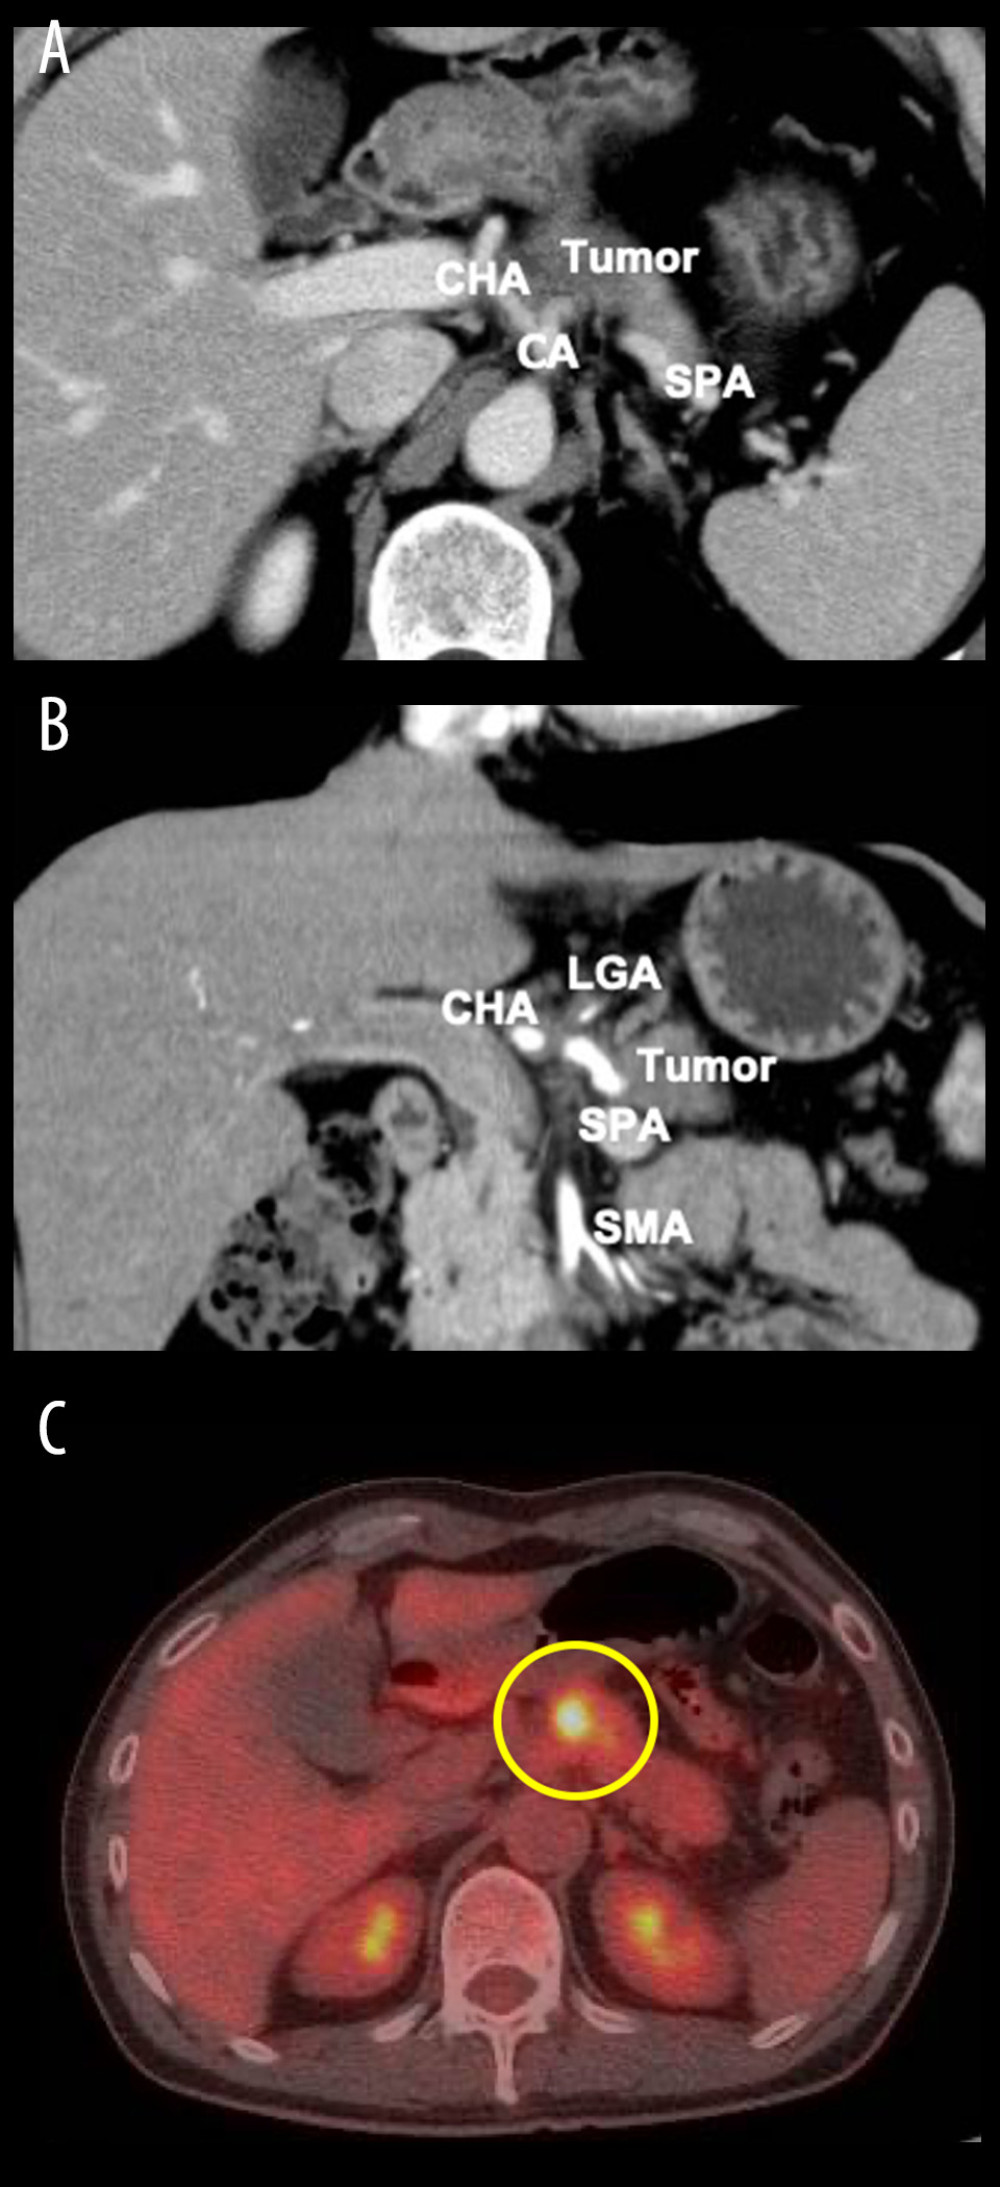 (A) Abdominal computed tomography (CT) at diagnosis. Abdominal CT showed a 40-mm hypovascular tumor in the pancreatic body. The tumor is abutment with the celiac artery (CA), common hepatic artery (CHA), and splenic artery (SPA). (B) Abdominal CT at diagnosis. The tumor is in contact with the CA, CHA, LGA, and SPA. There is no tumor encasement in the superior mesenteric artery (SMA). (C) Positron emission tomography-computed tomography (PET-CT) at diagnosis. This revealed increased metabolic activity in the pancreatic tumor.